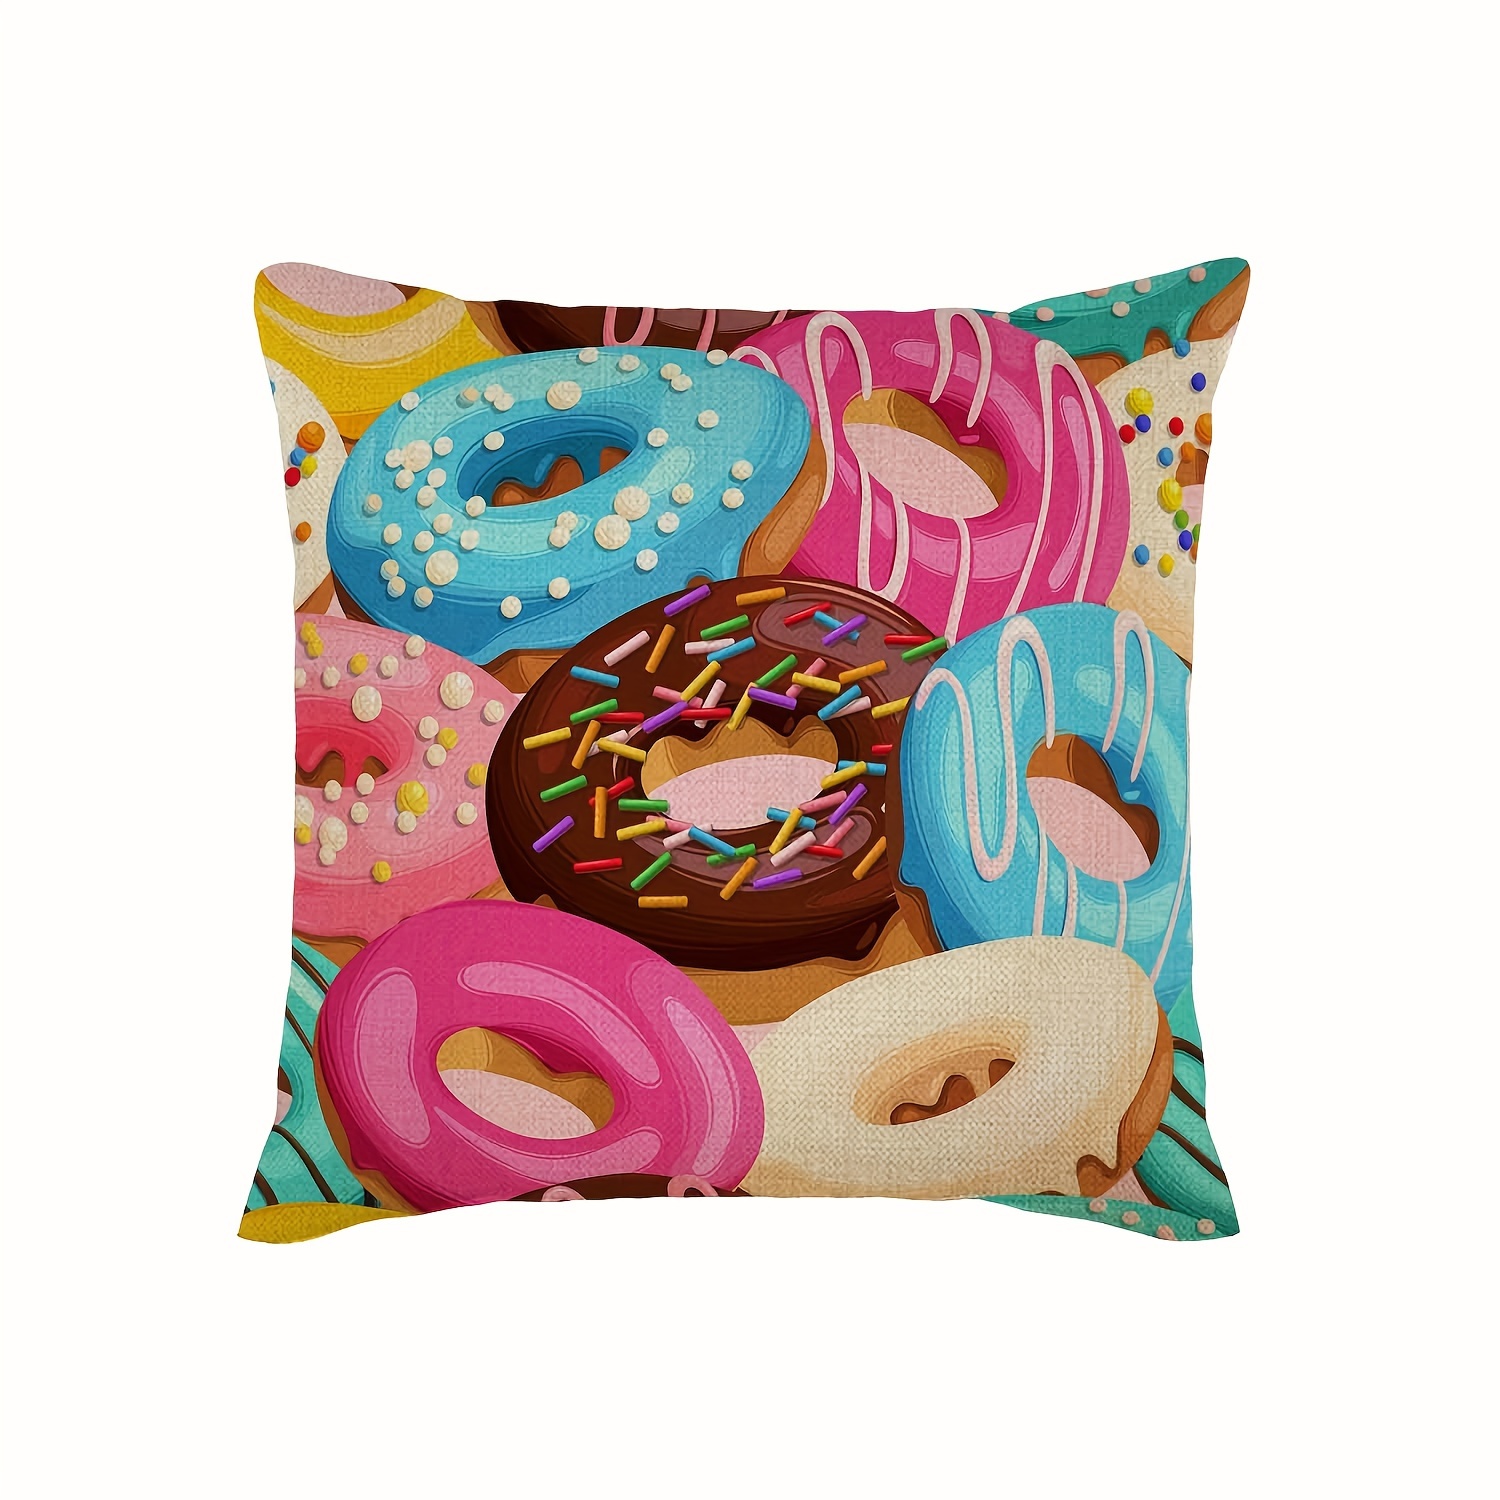  Donut Hole Apparel Co Donuts Throw Pillow, 18x18